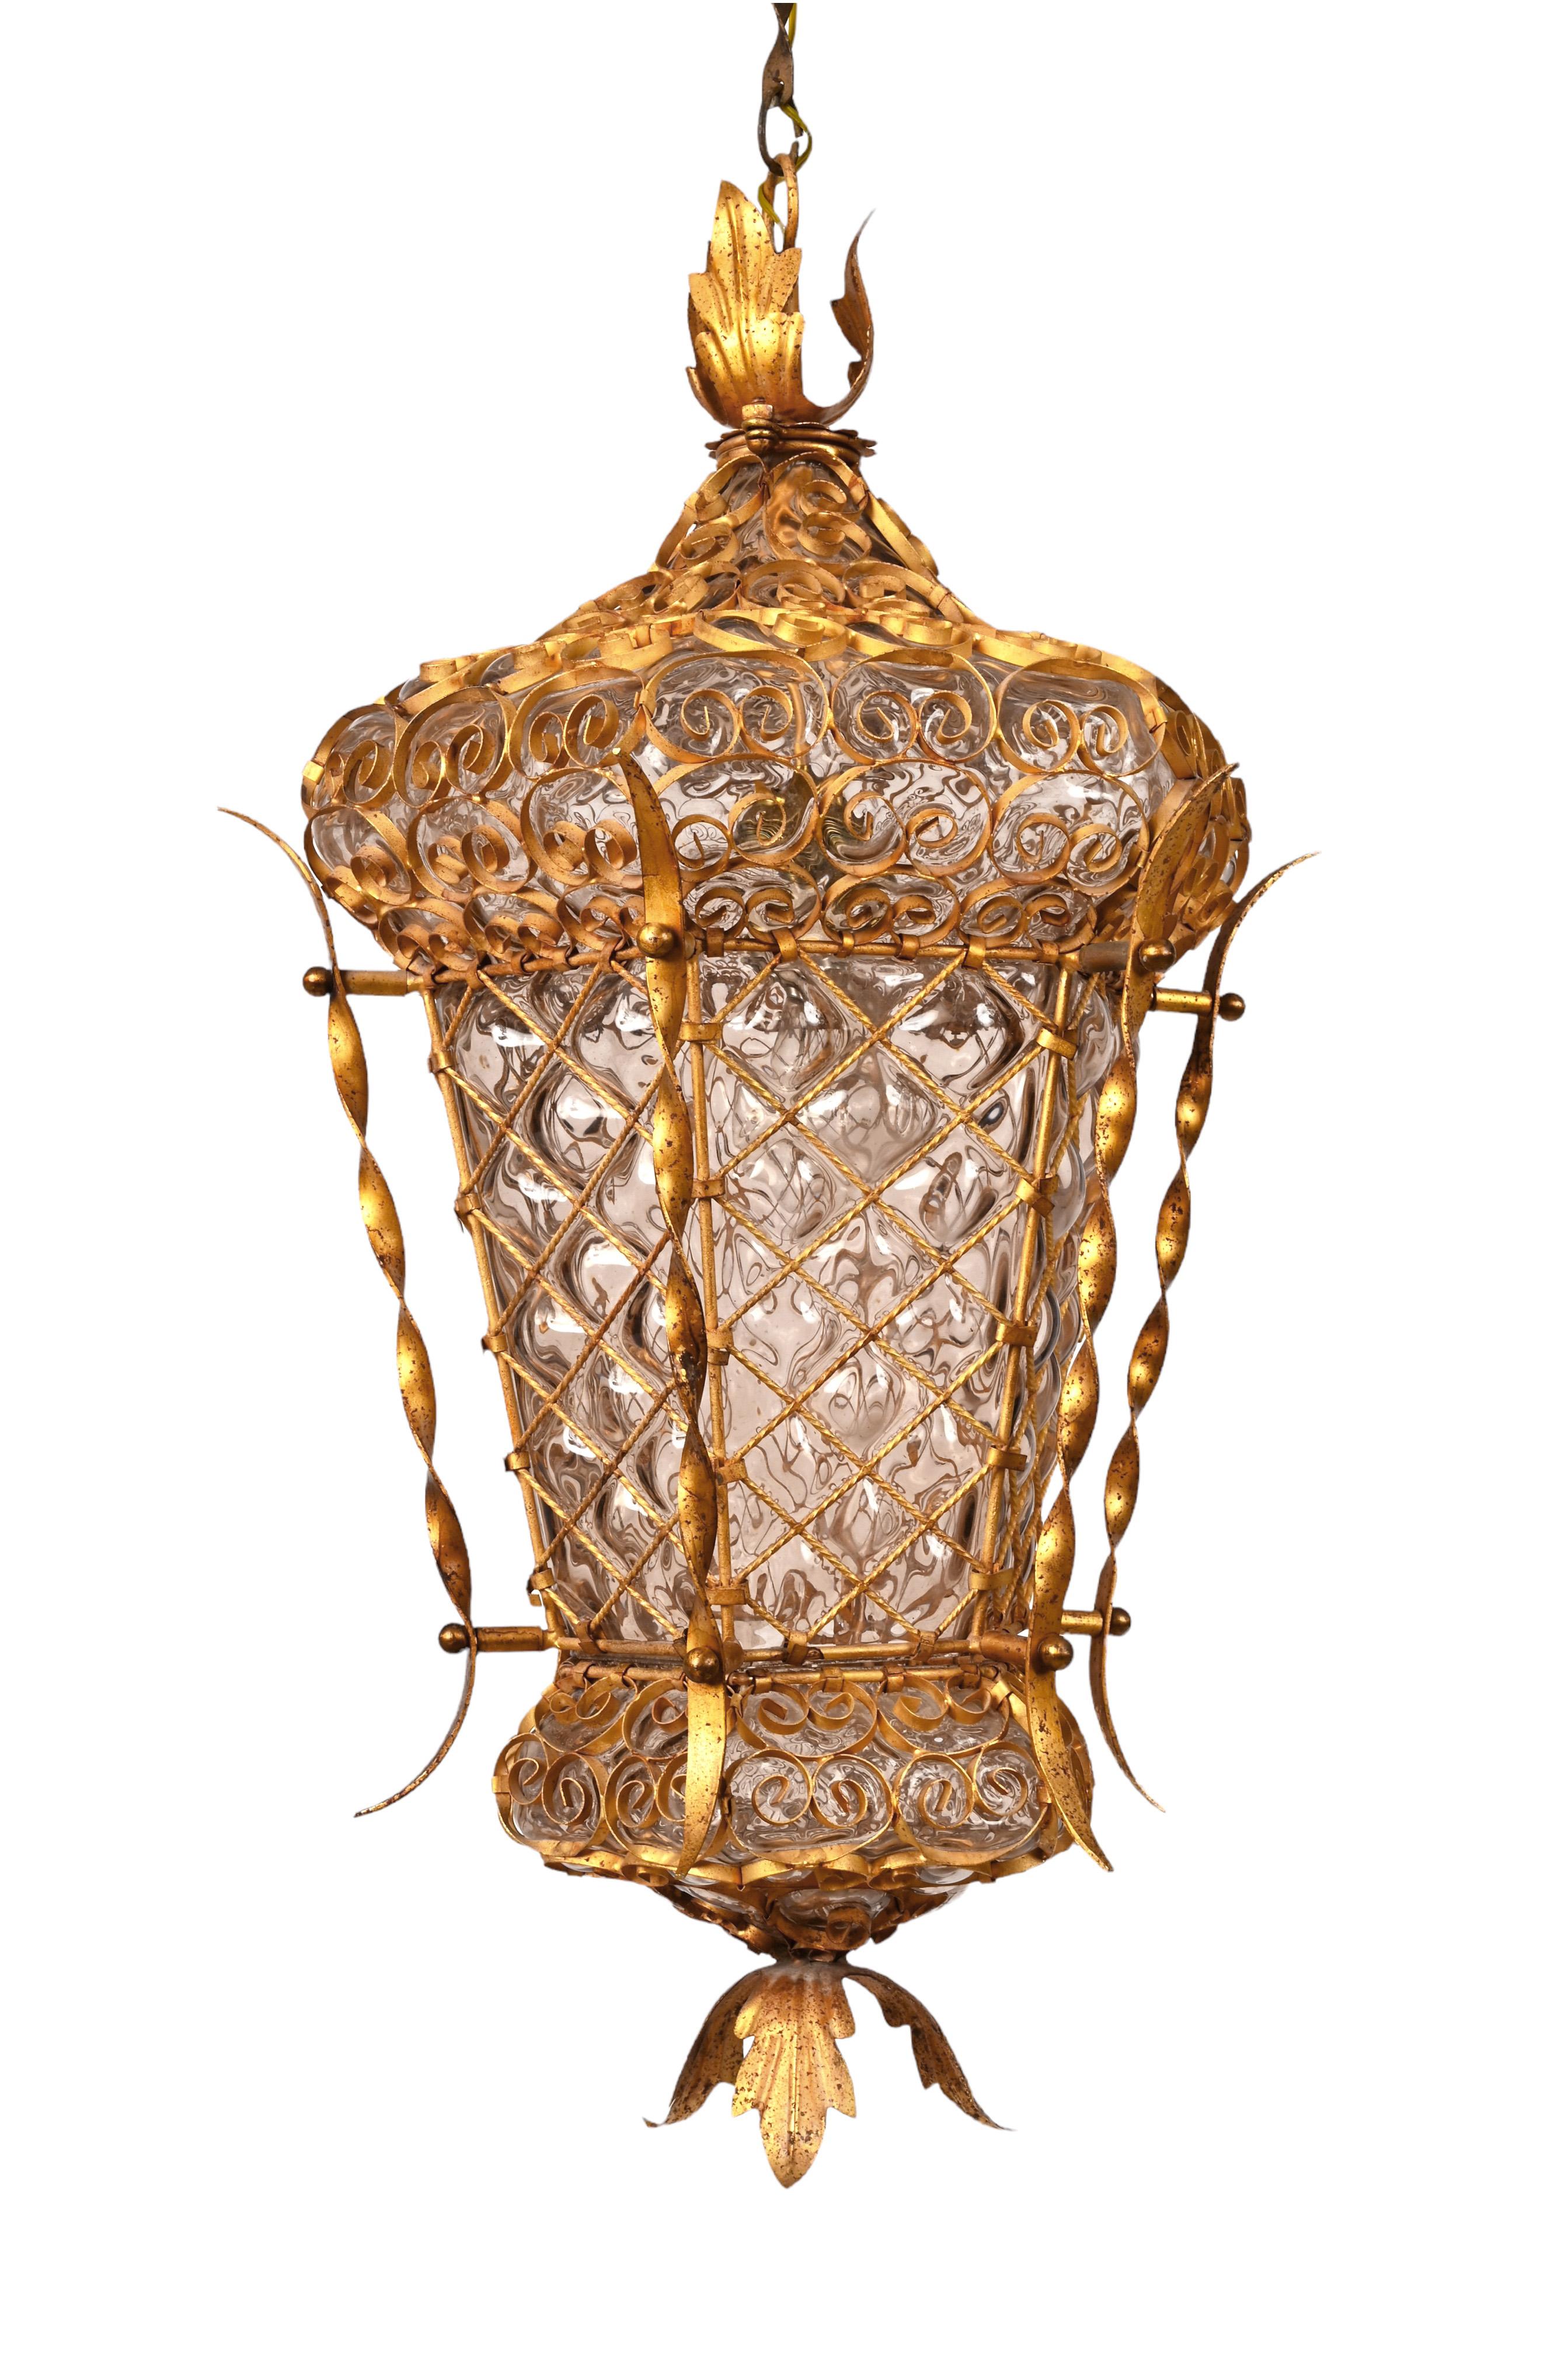 Hand-Crafted Midcentury Venetian Mouth Blown Glass in Gold Painted Metal Frame Lantern, 1940s For Sale